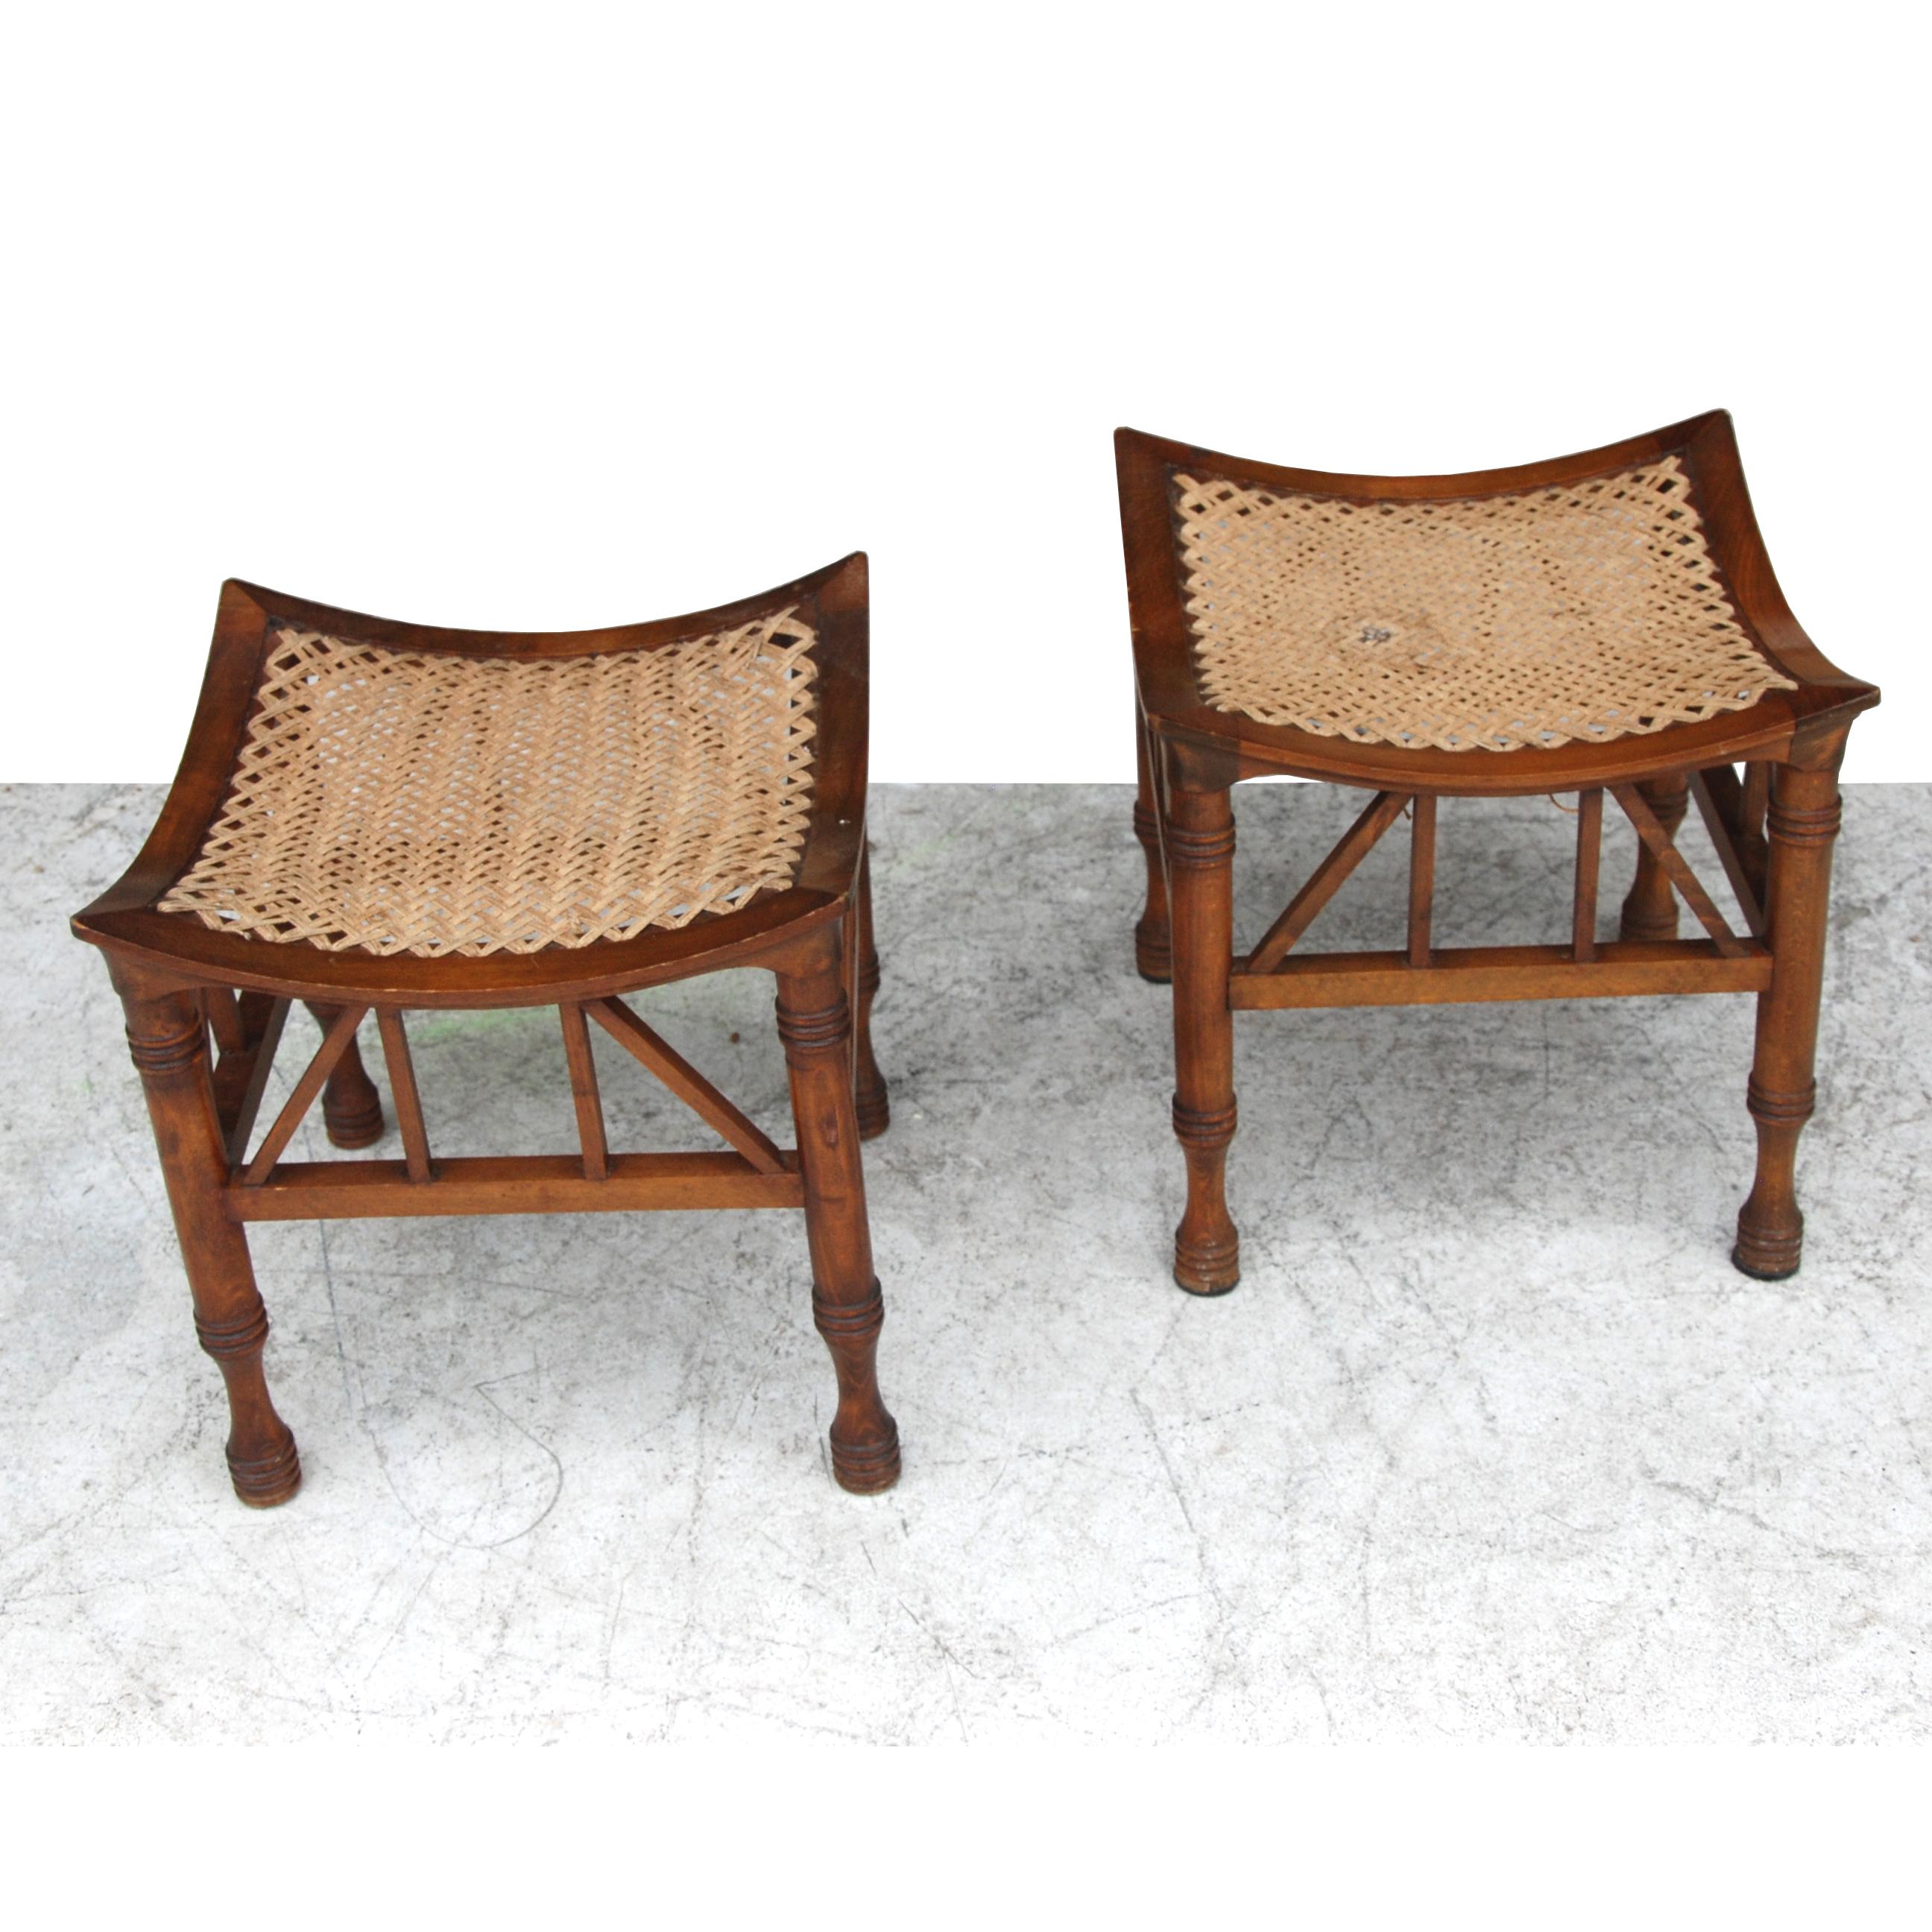 European Pair of Early 20th Century Thebes Stools